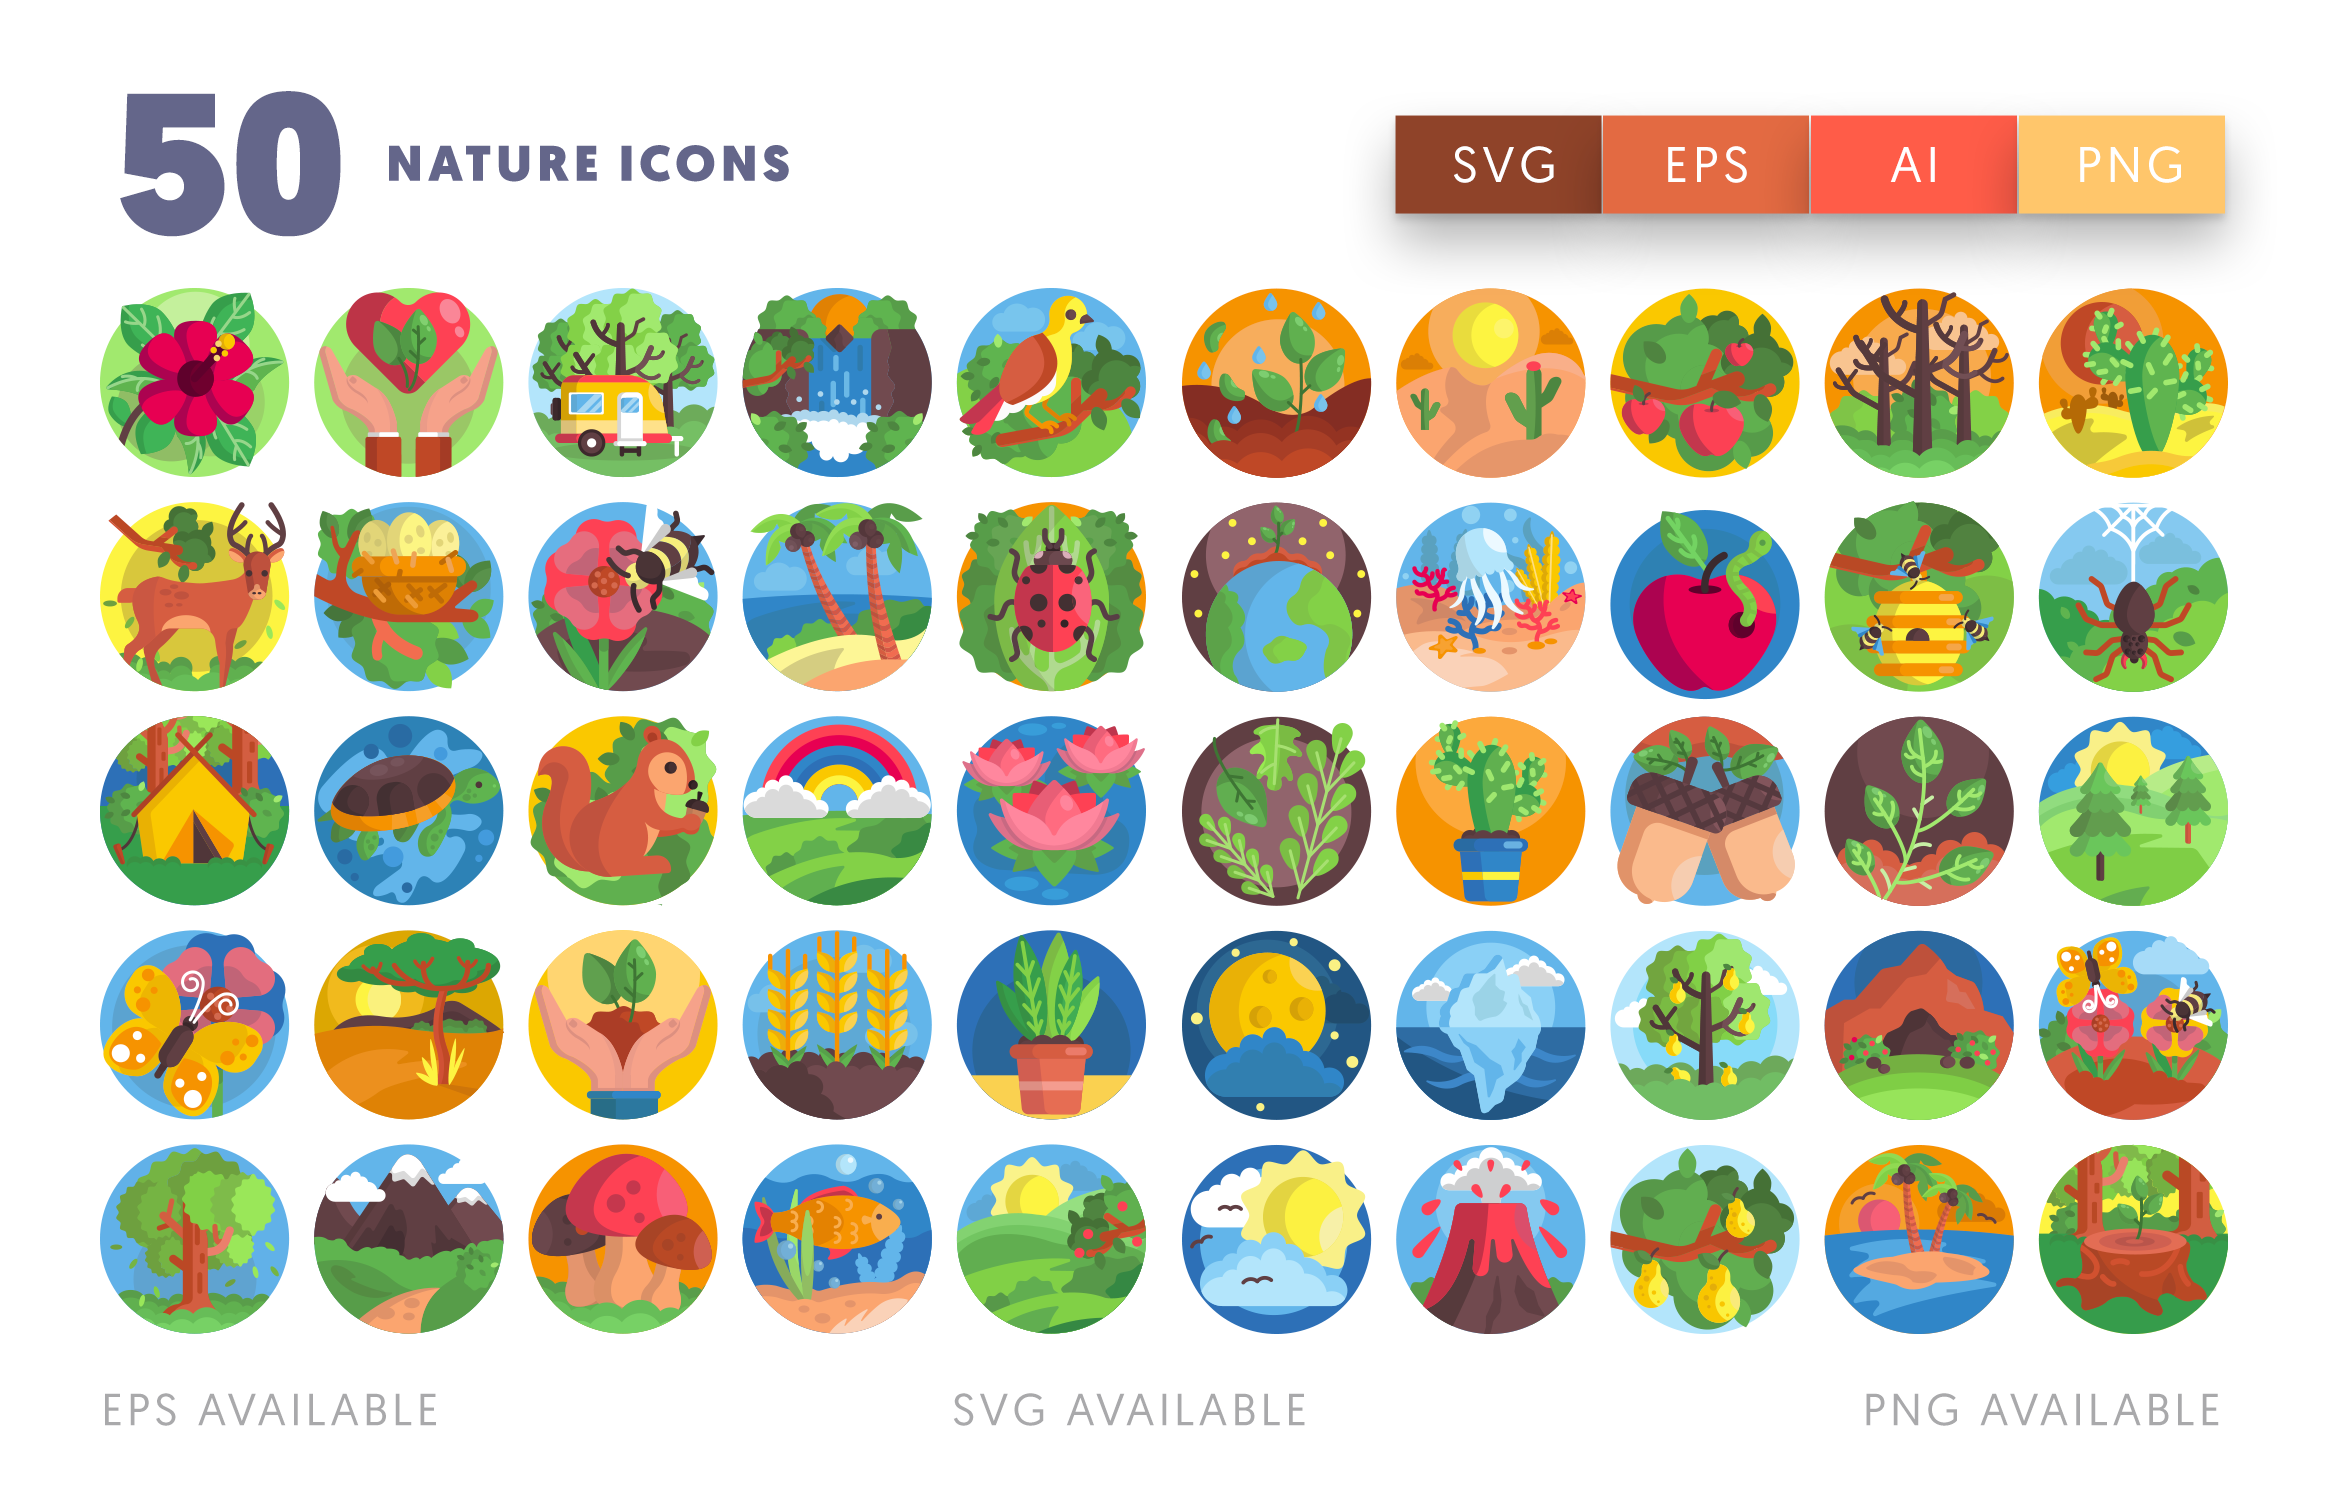 50 Nature Icons